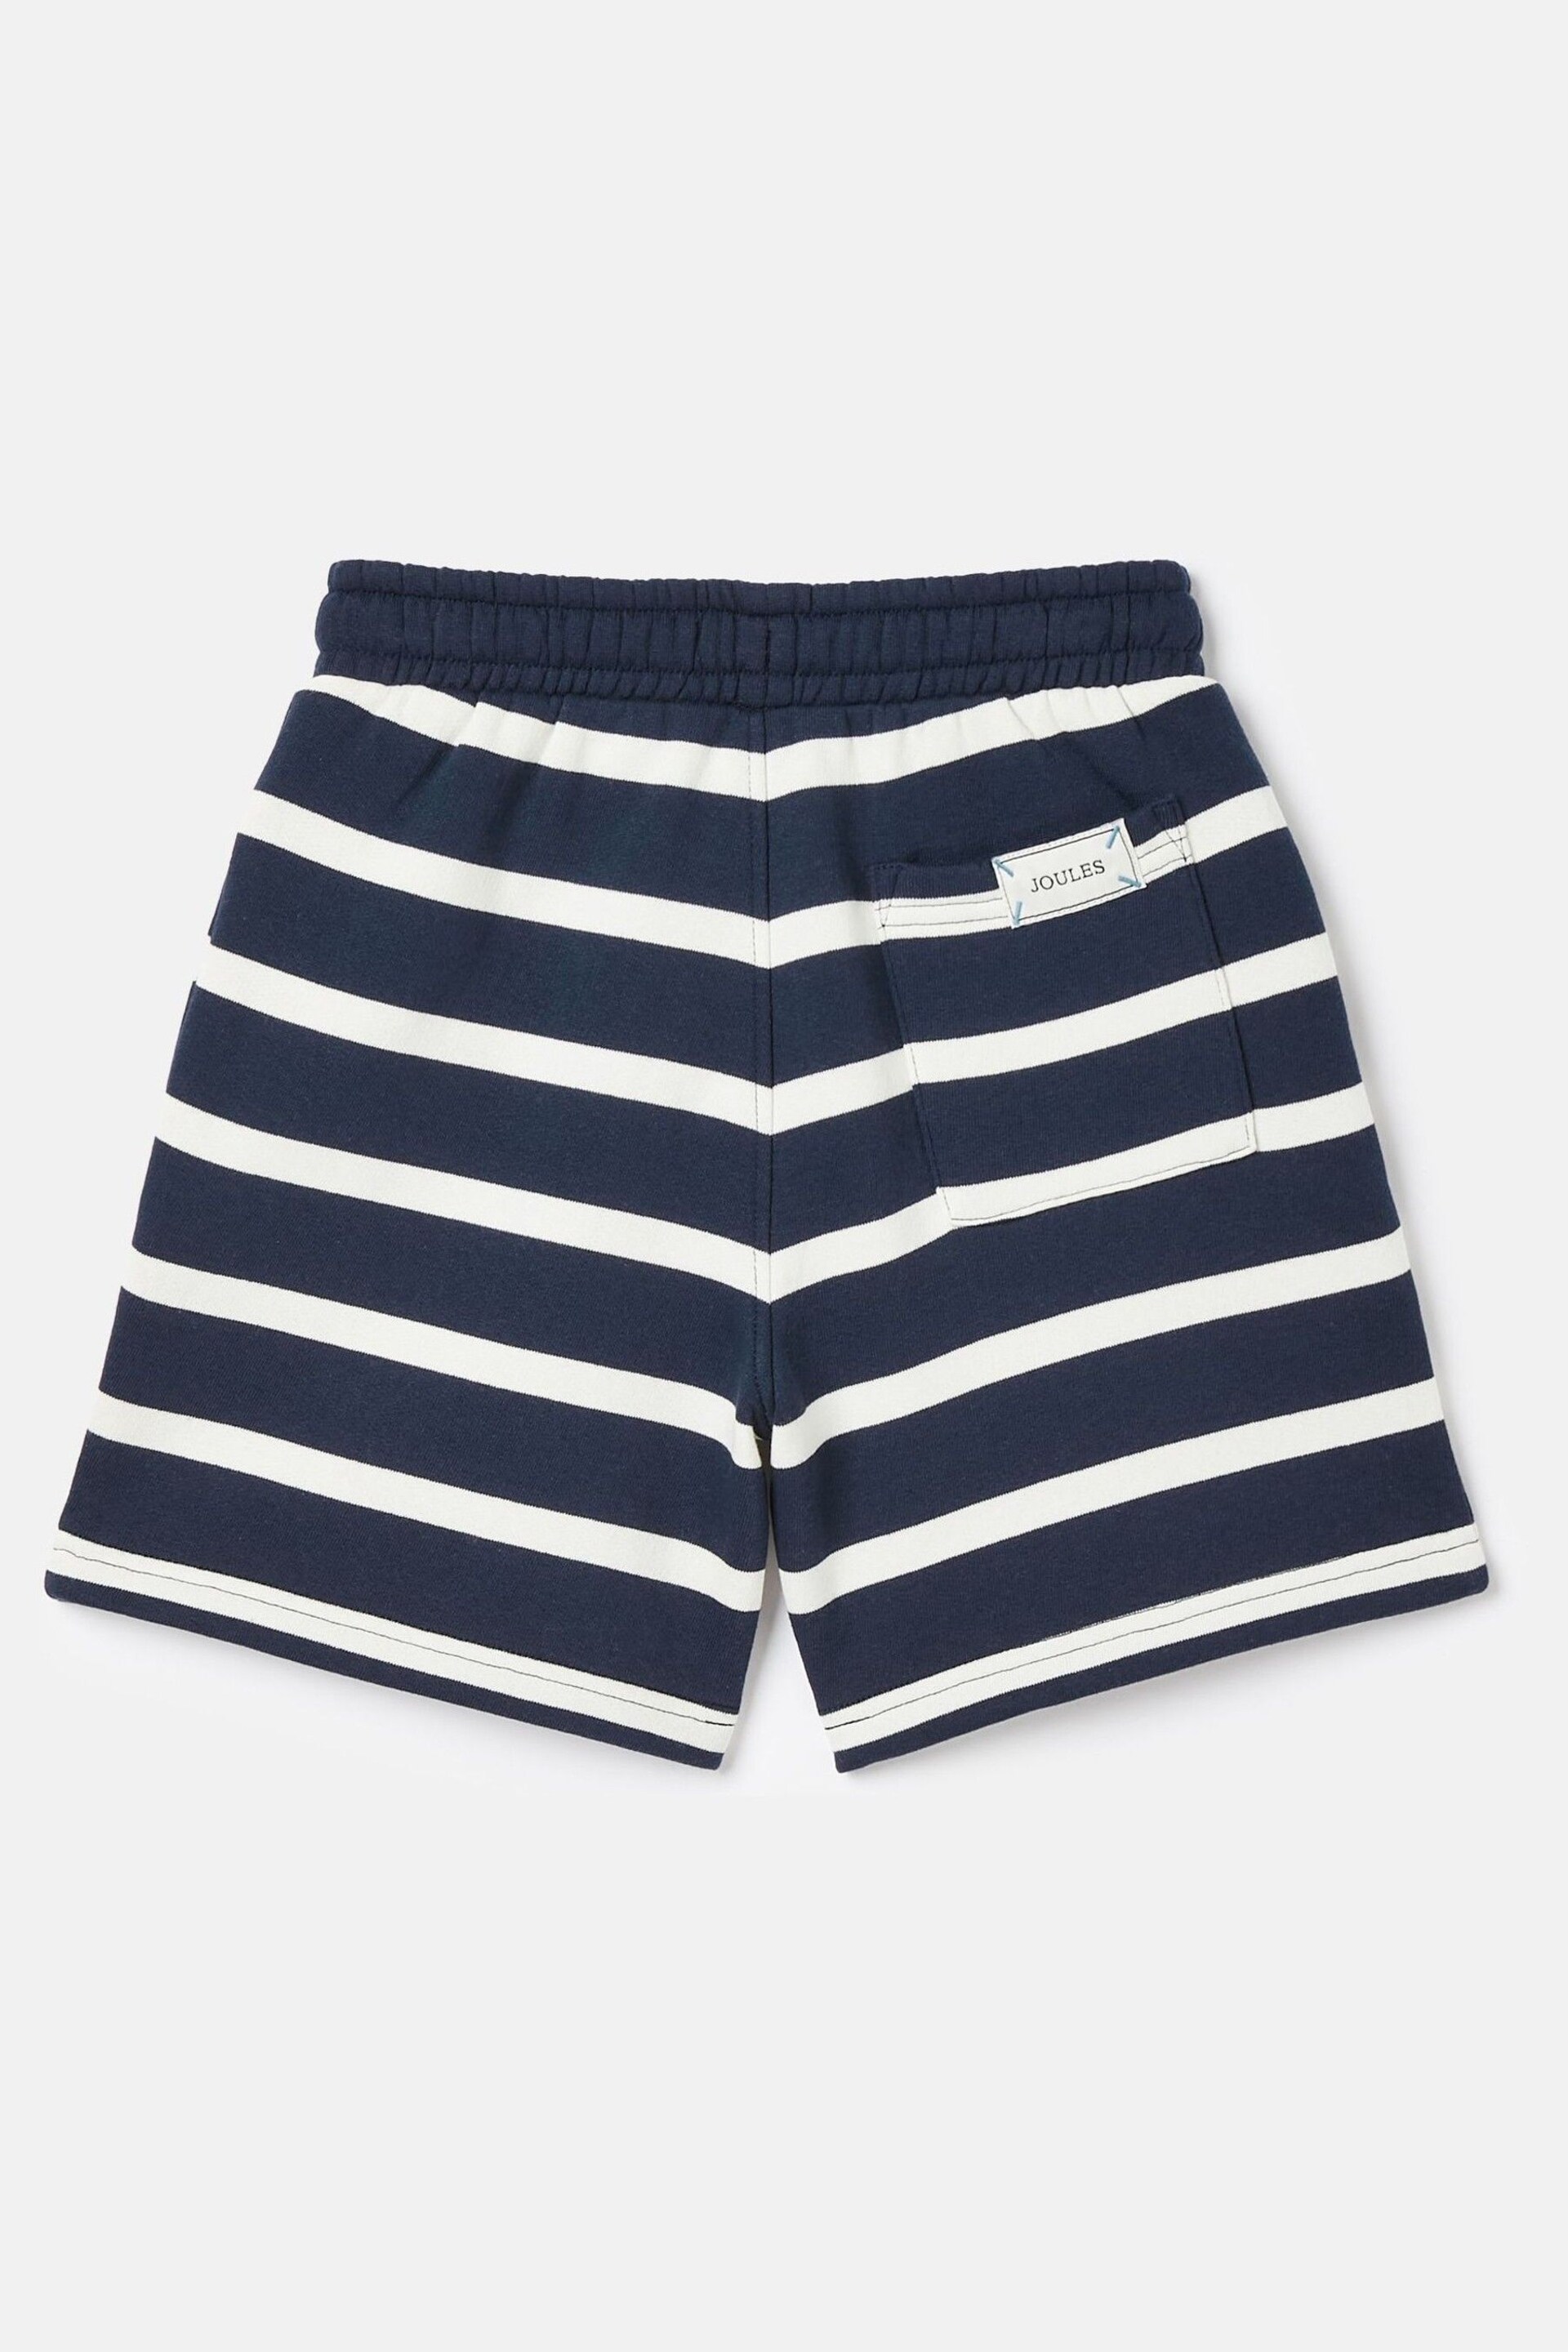 Joules Barton Navy & White Striped Jersey Shorts - Image 2 of 6